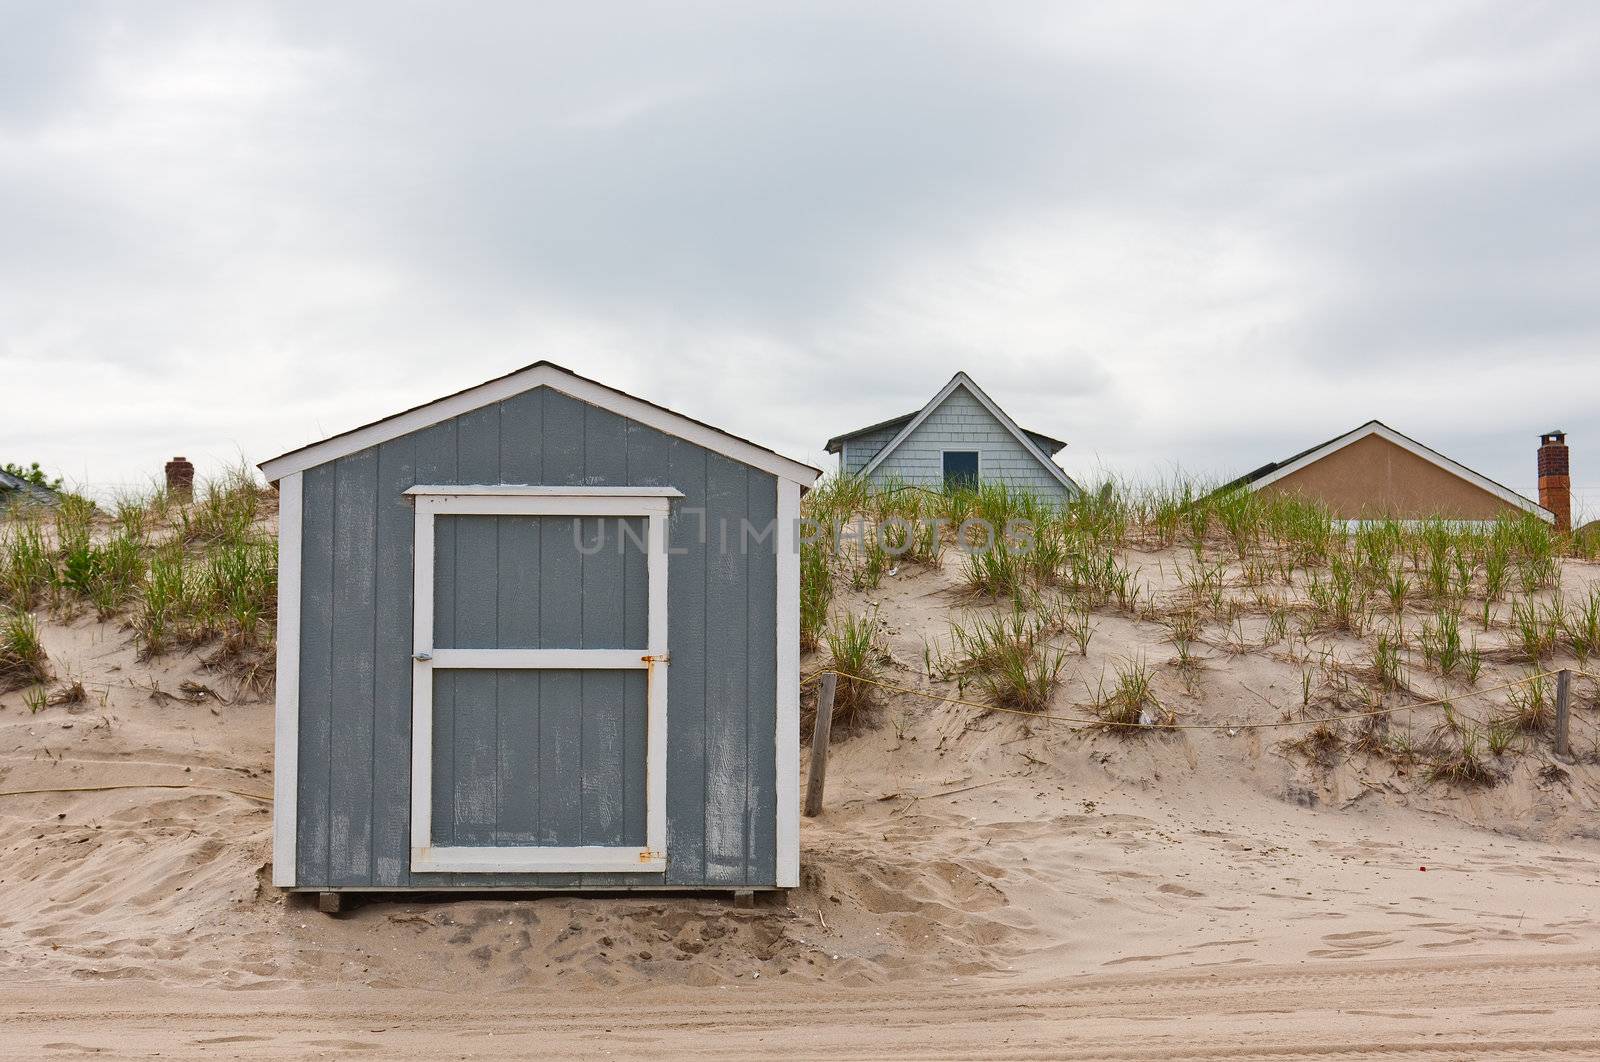 A storage shed in front of dunes on a beach